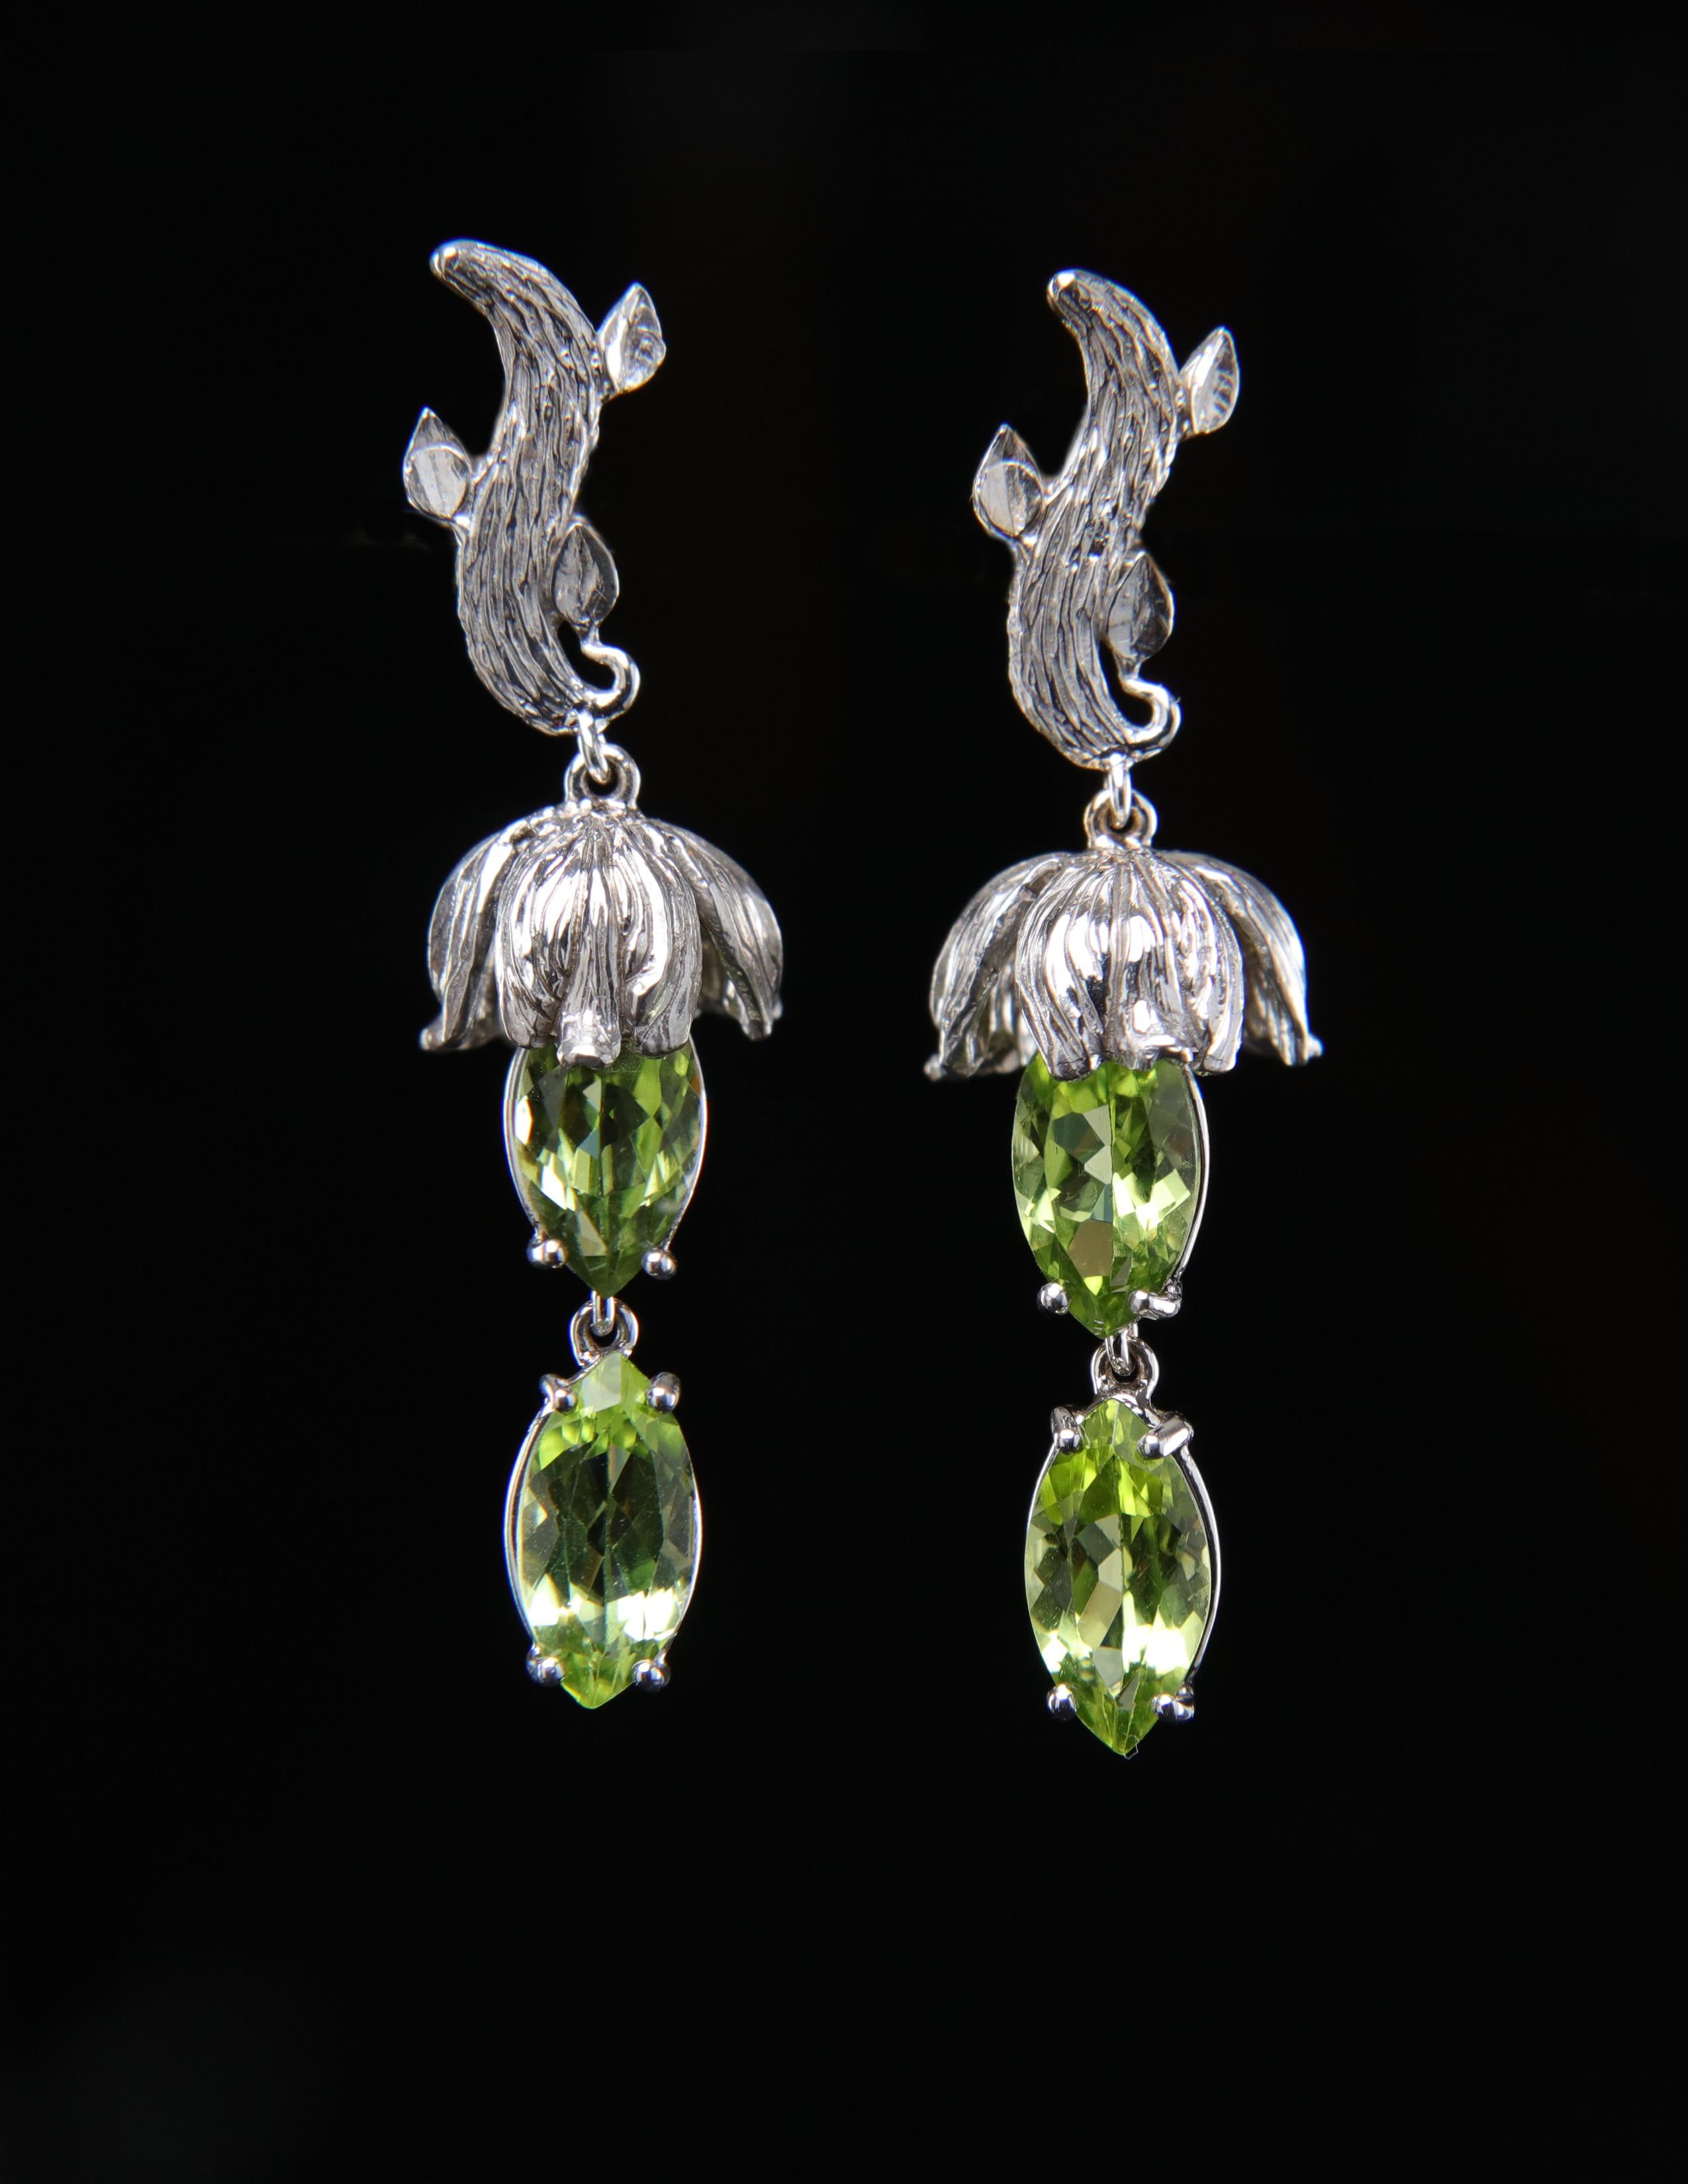 The peridot in this white gold earring has a past. Scientist found it in solar dust dating back to the formation of our solar system.  Now, peridot is found around the world including in: lava flows in Hawaii, on the San Carlos Apache Indian